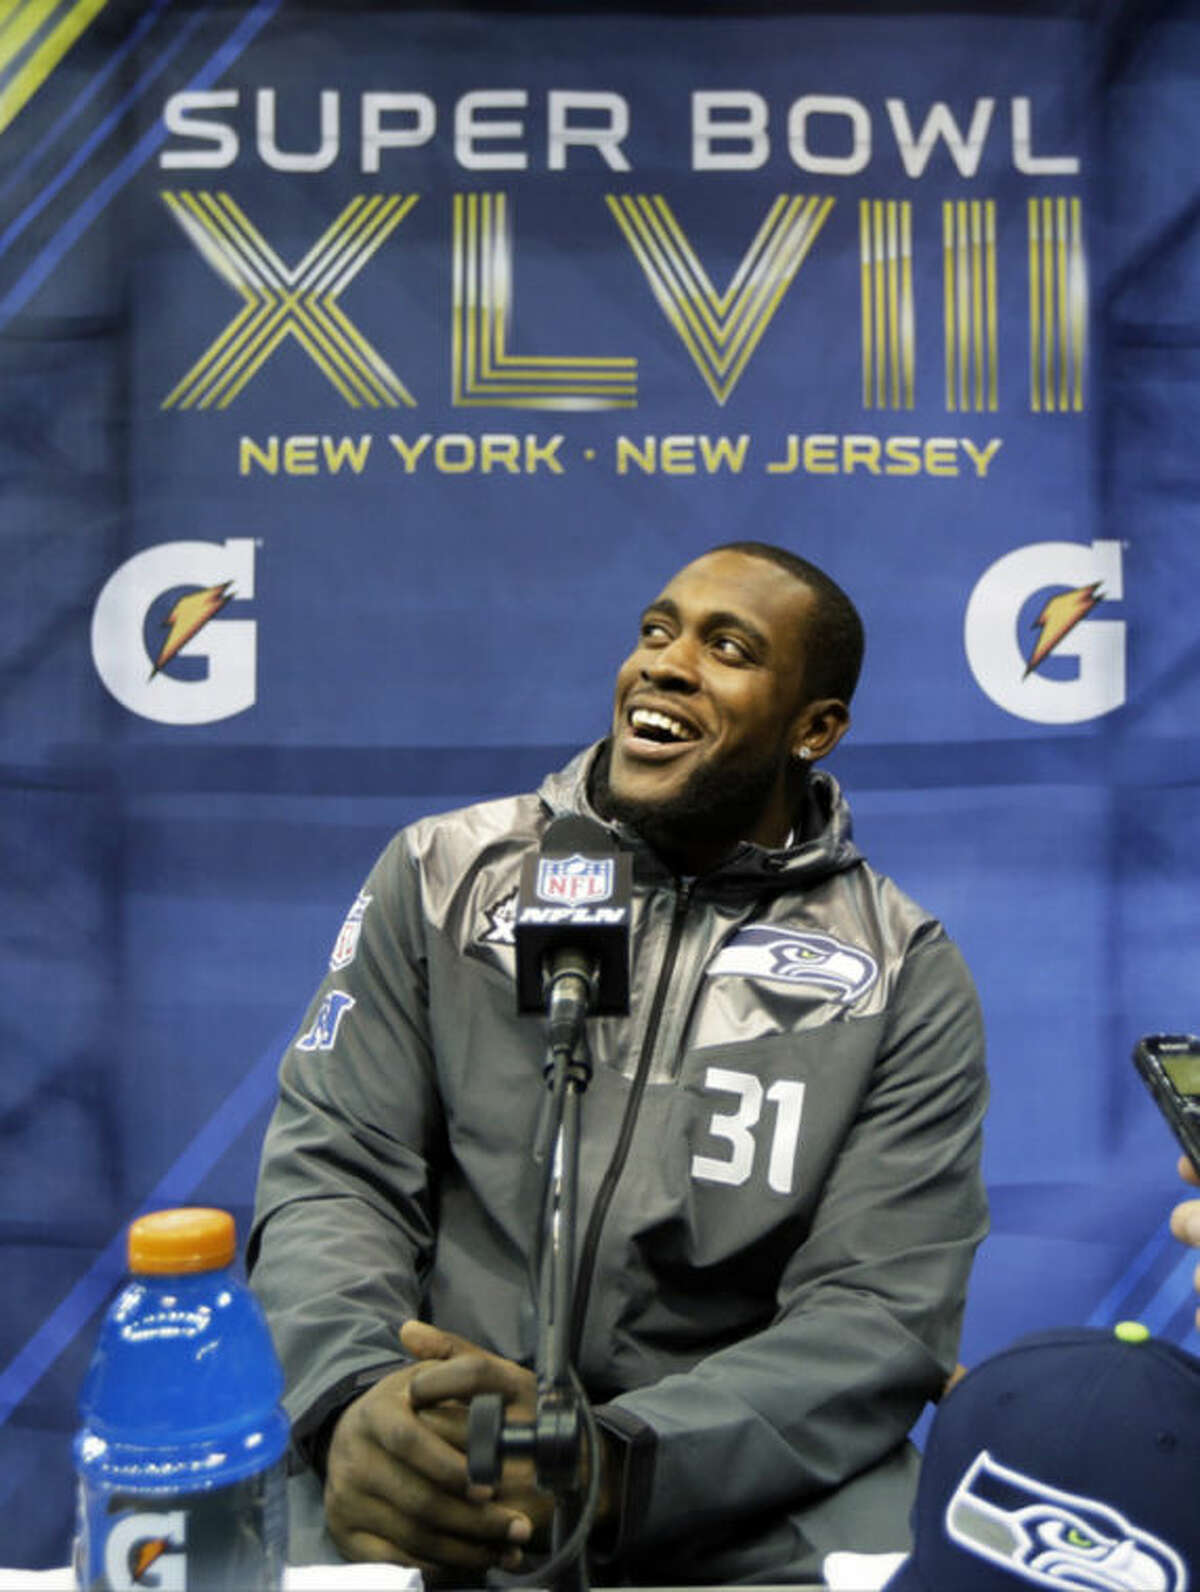 Seattle Seahawks' Kam Chancellor answers a question during media day for the NFL Super Bowl XLVIII football game Tuesday, Jan. 28, 2014, in Newark, N.J. (AP Photo/Jeff Roberson)